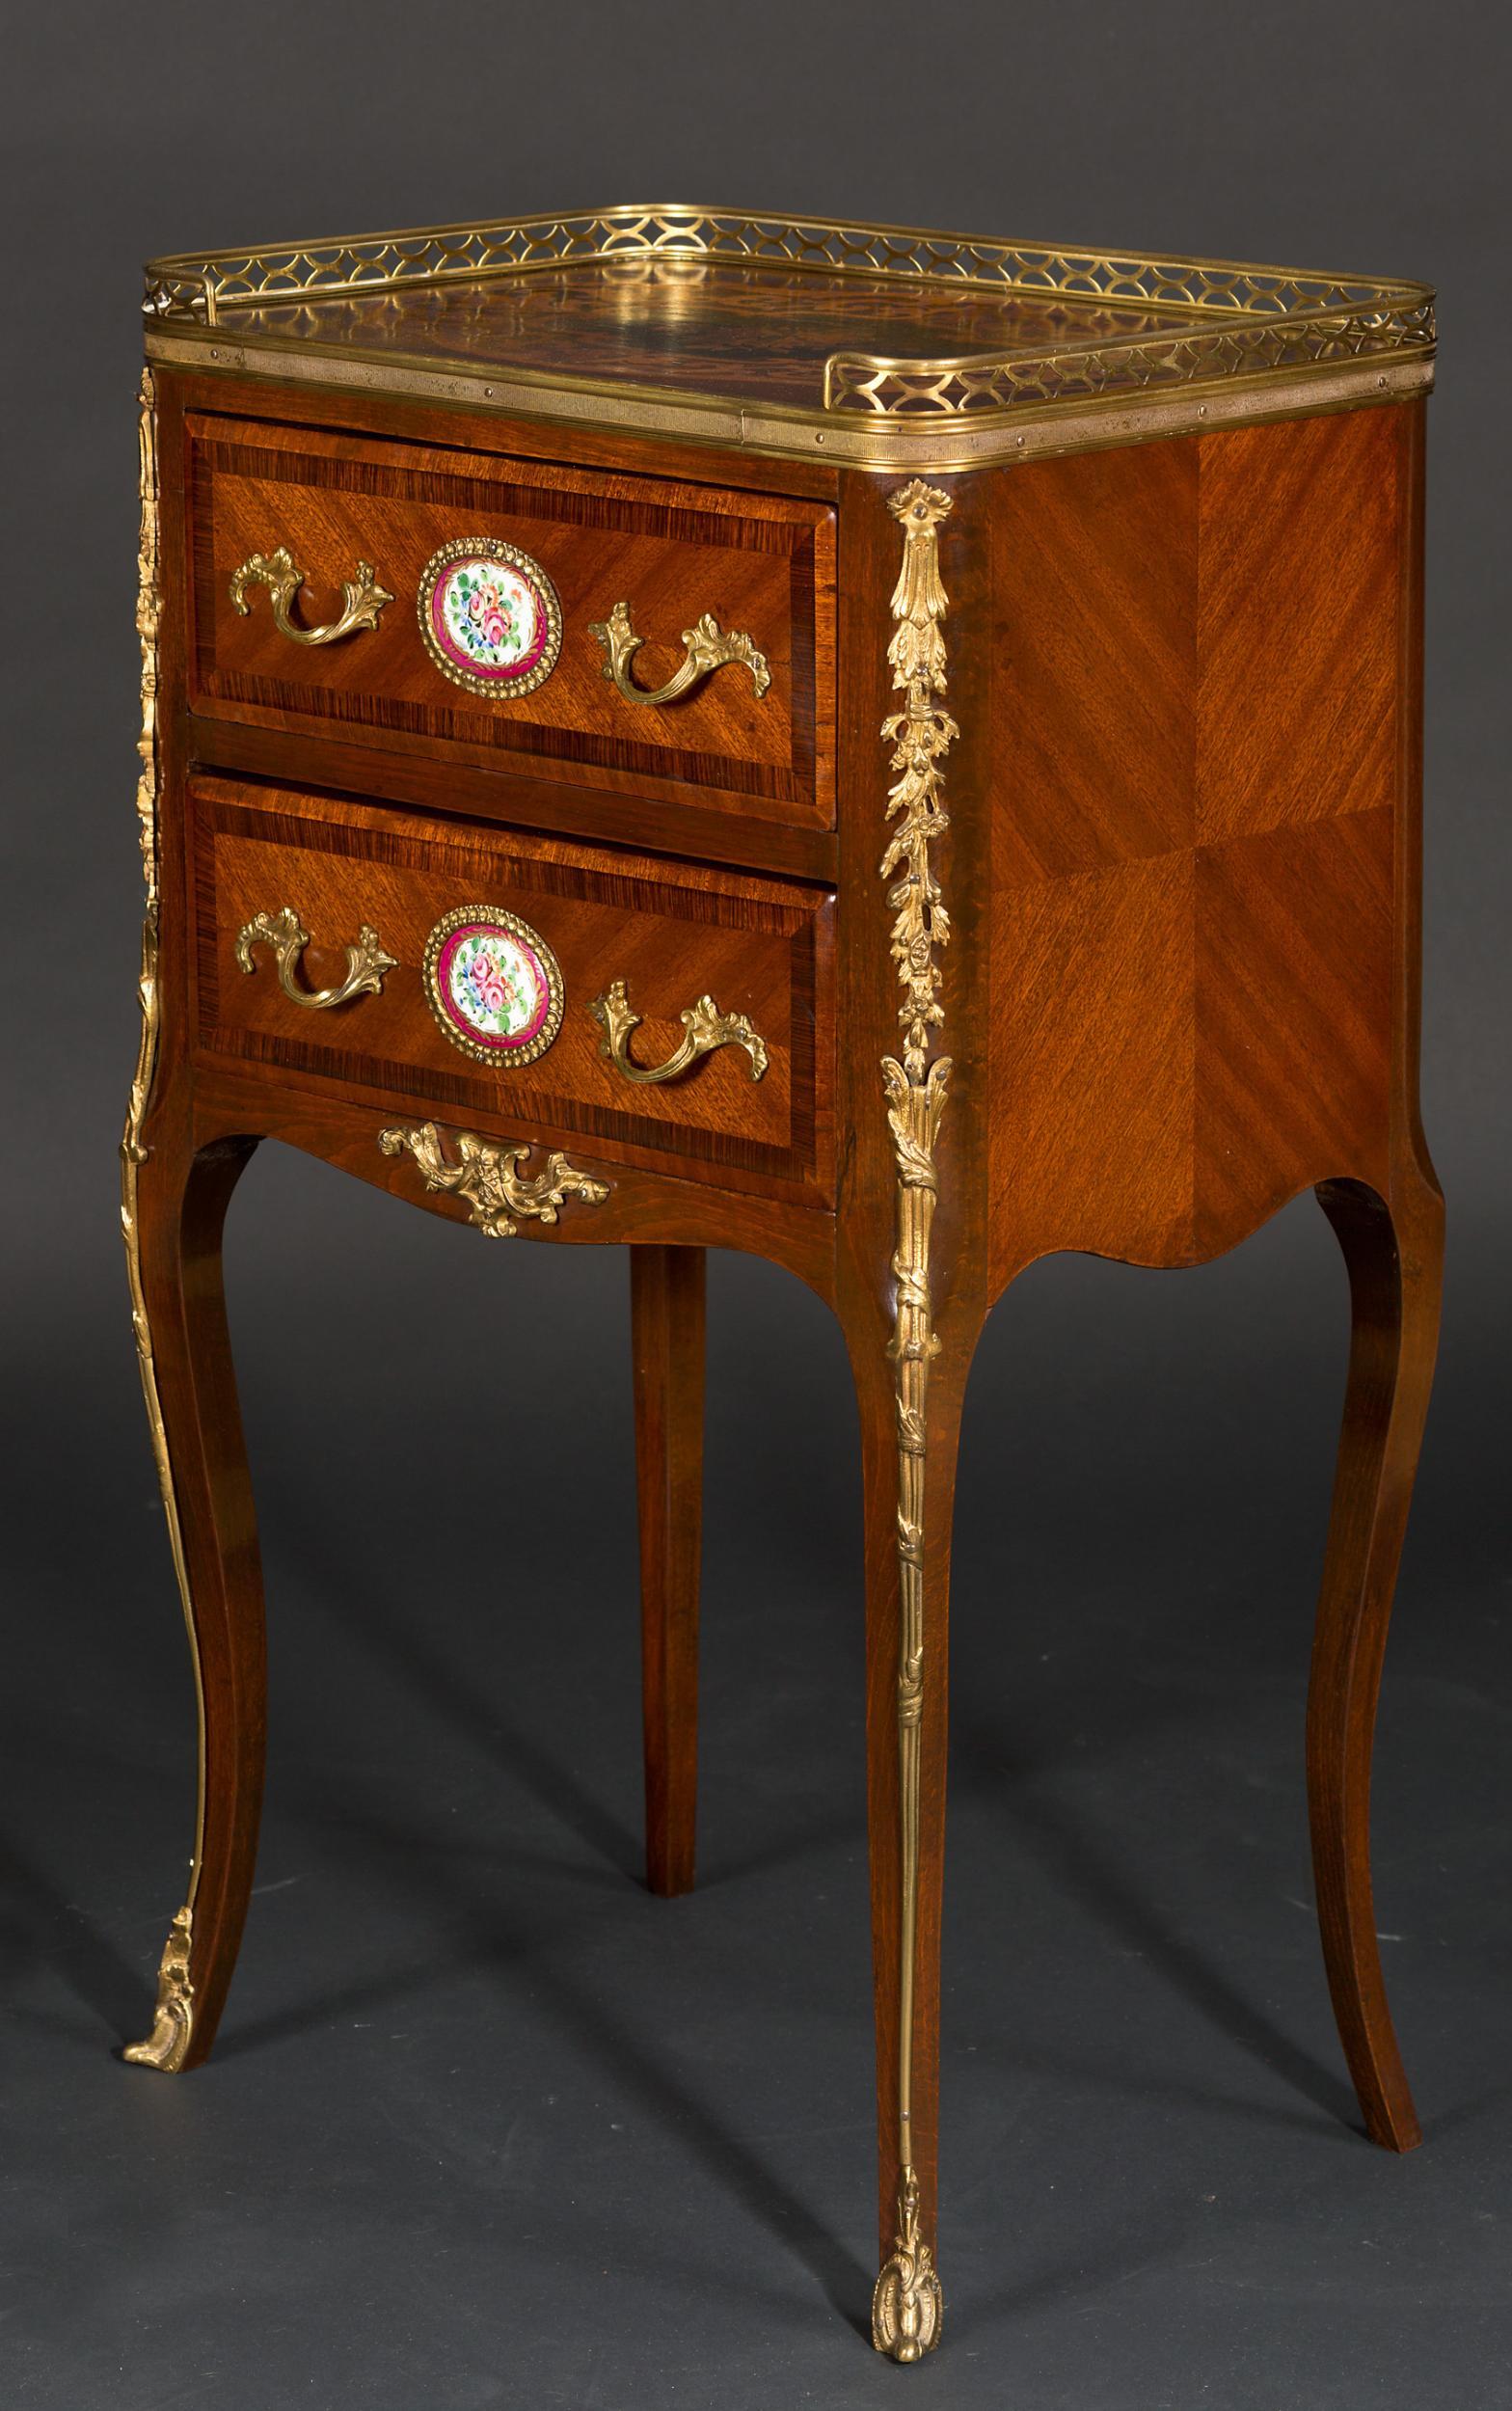 French mahogany table with gallery top, marquetry inlay and two drawers with painted enamel plaques.
c.1890.